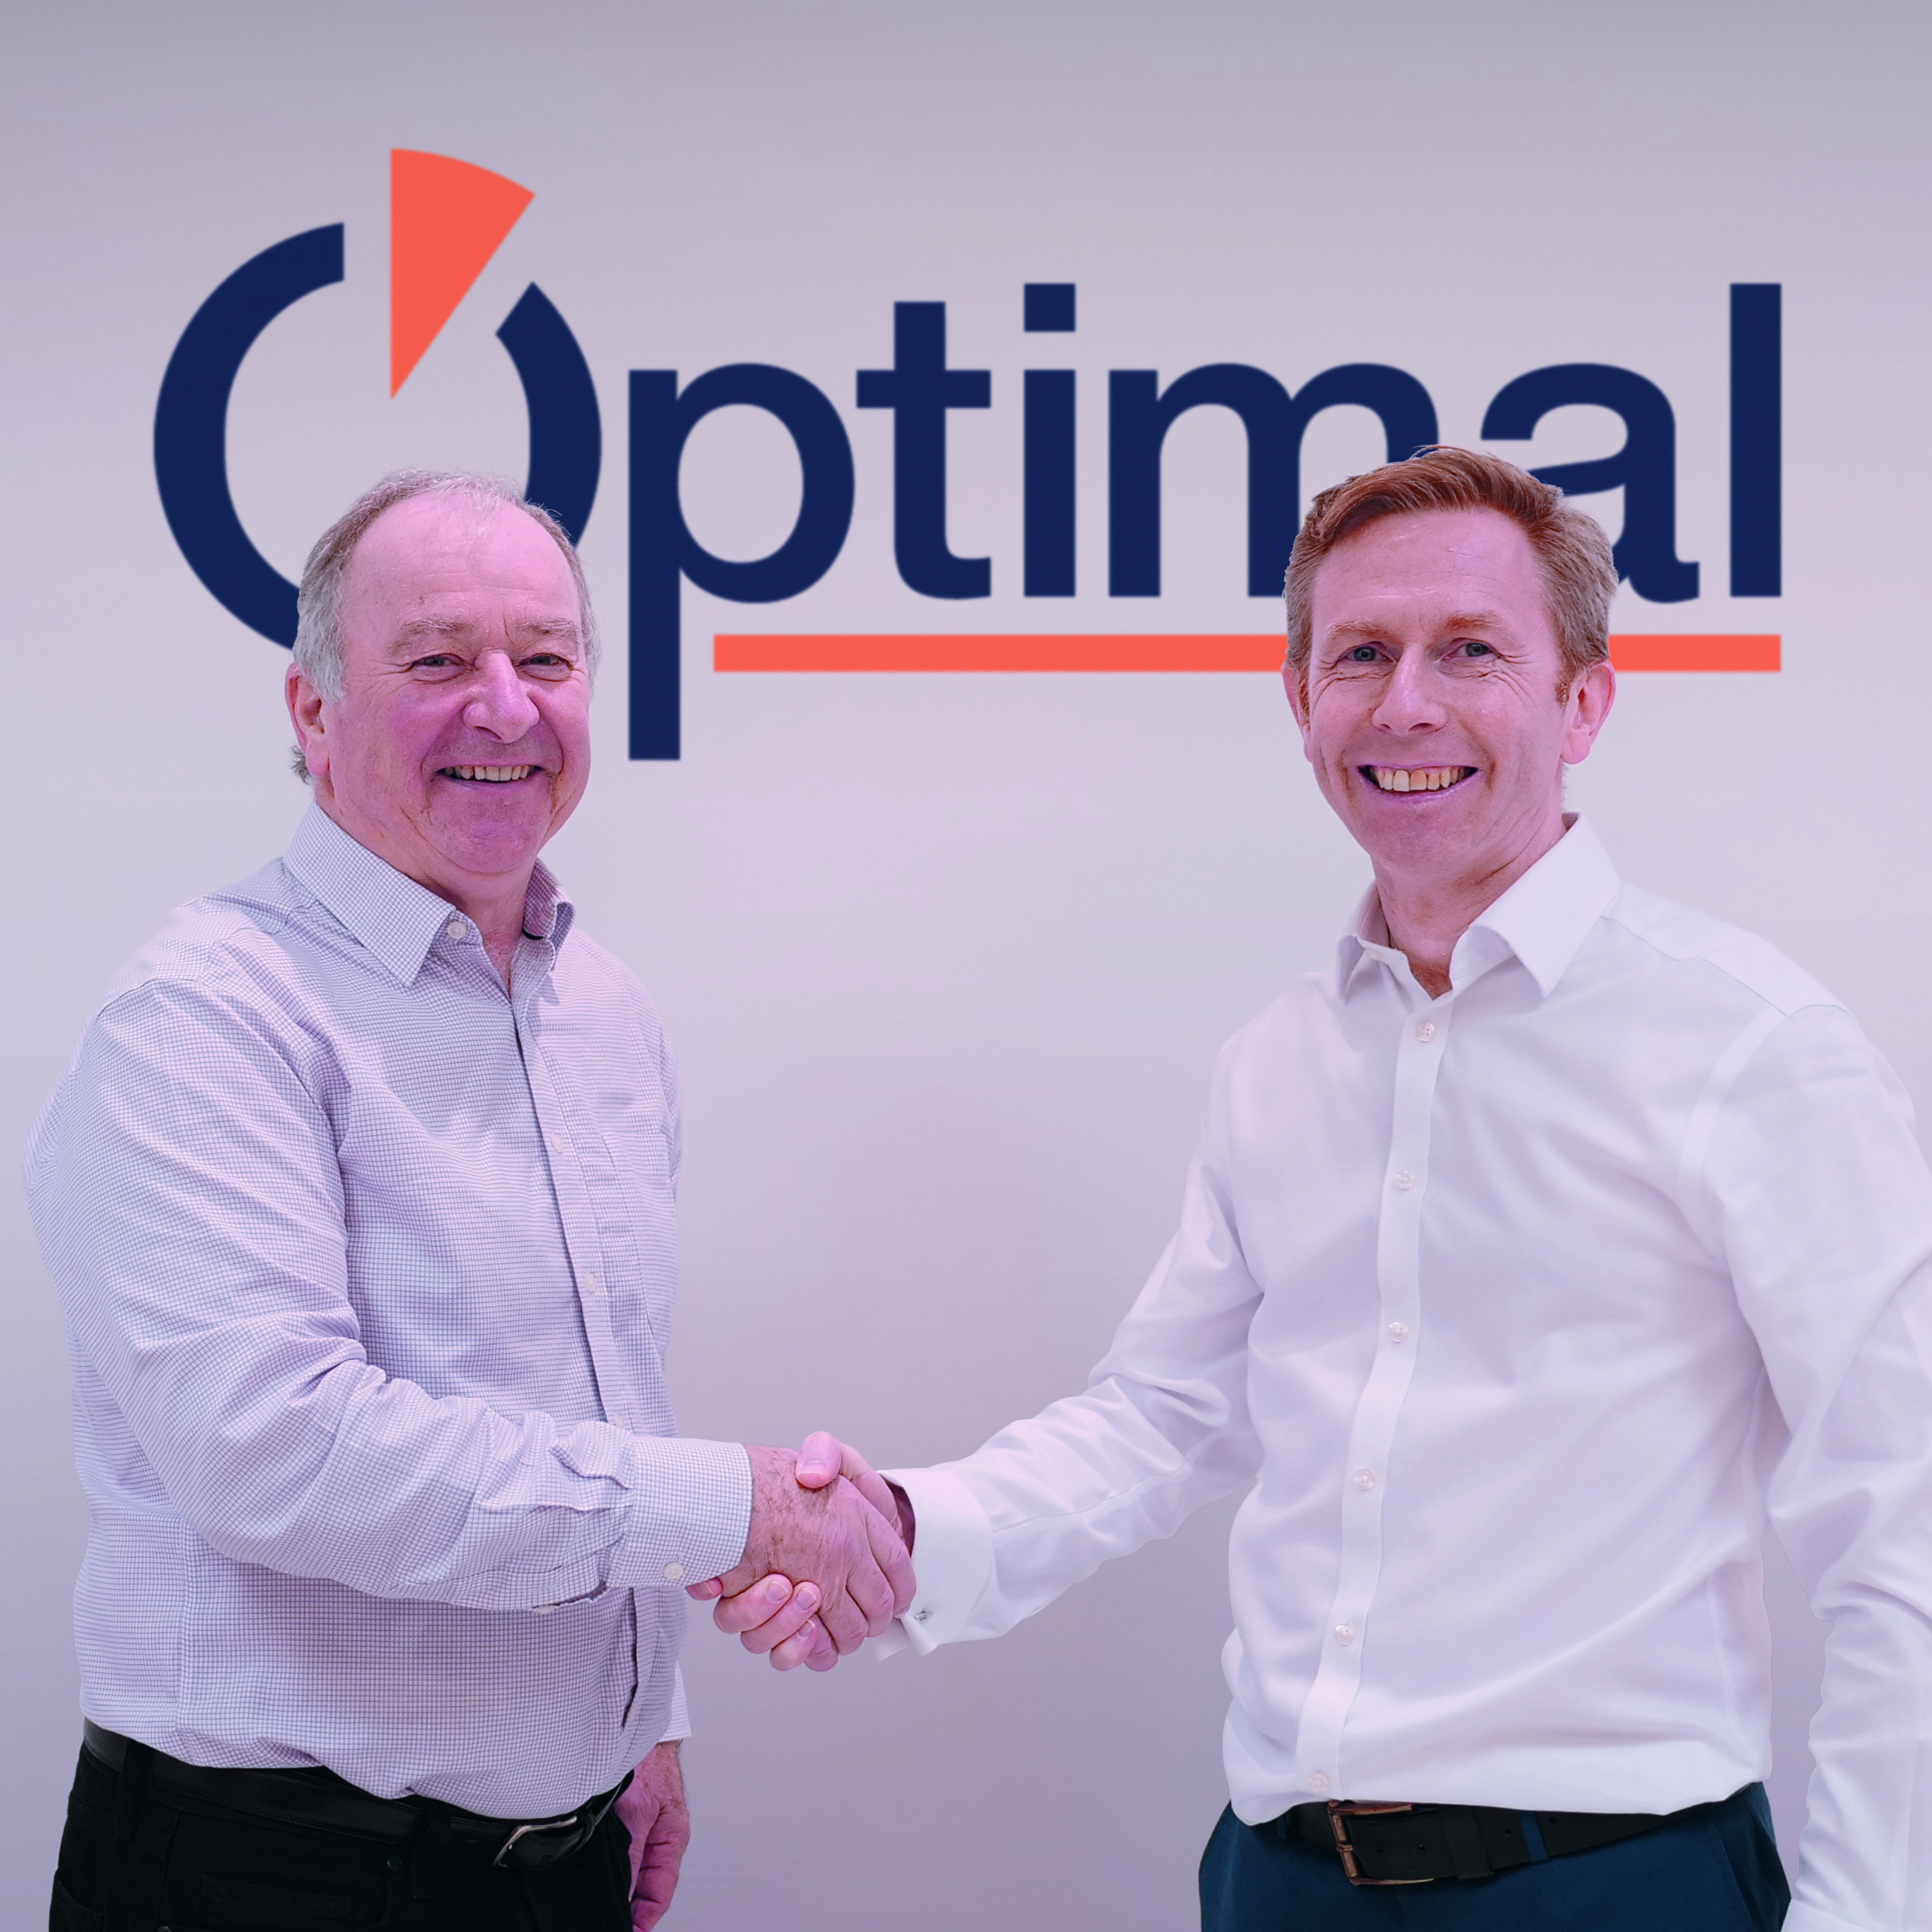 The Optimal Group has promoted Eamonn Garry to be Chief Executive Officer and Martin Gadsby to Chairman